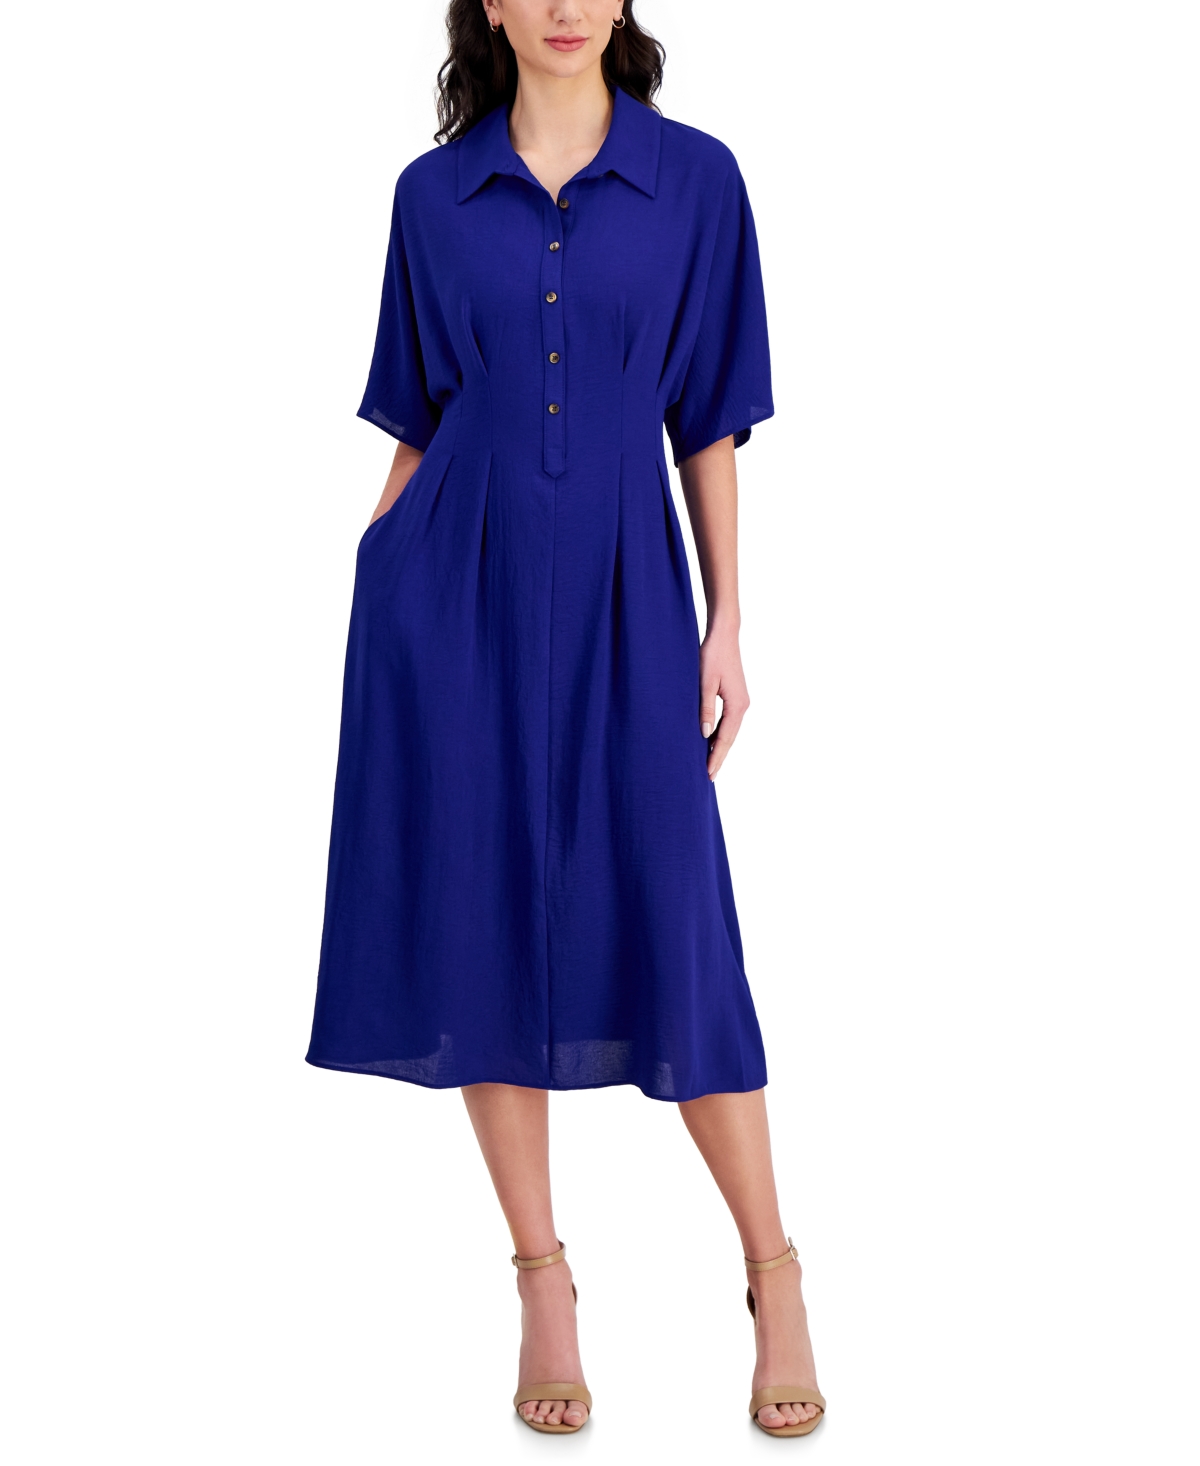 Women's Collared Partial-Button-Front Midi Dress - Electric Blue